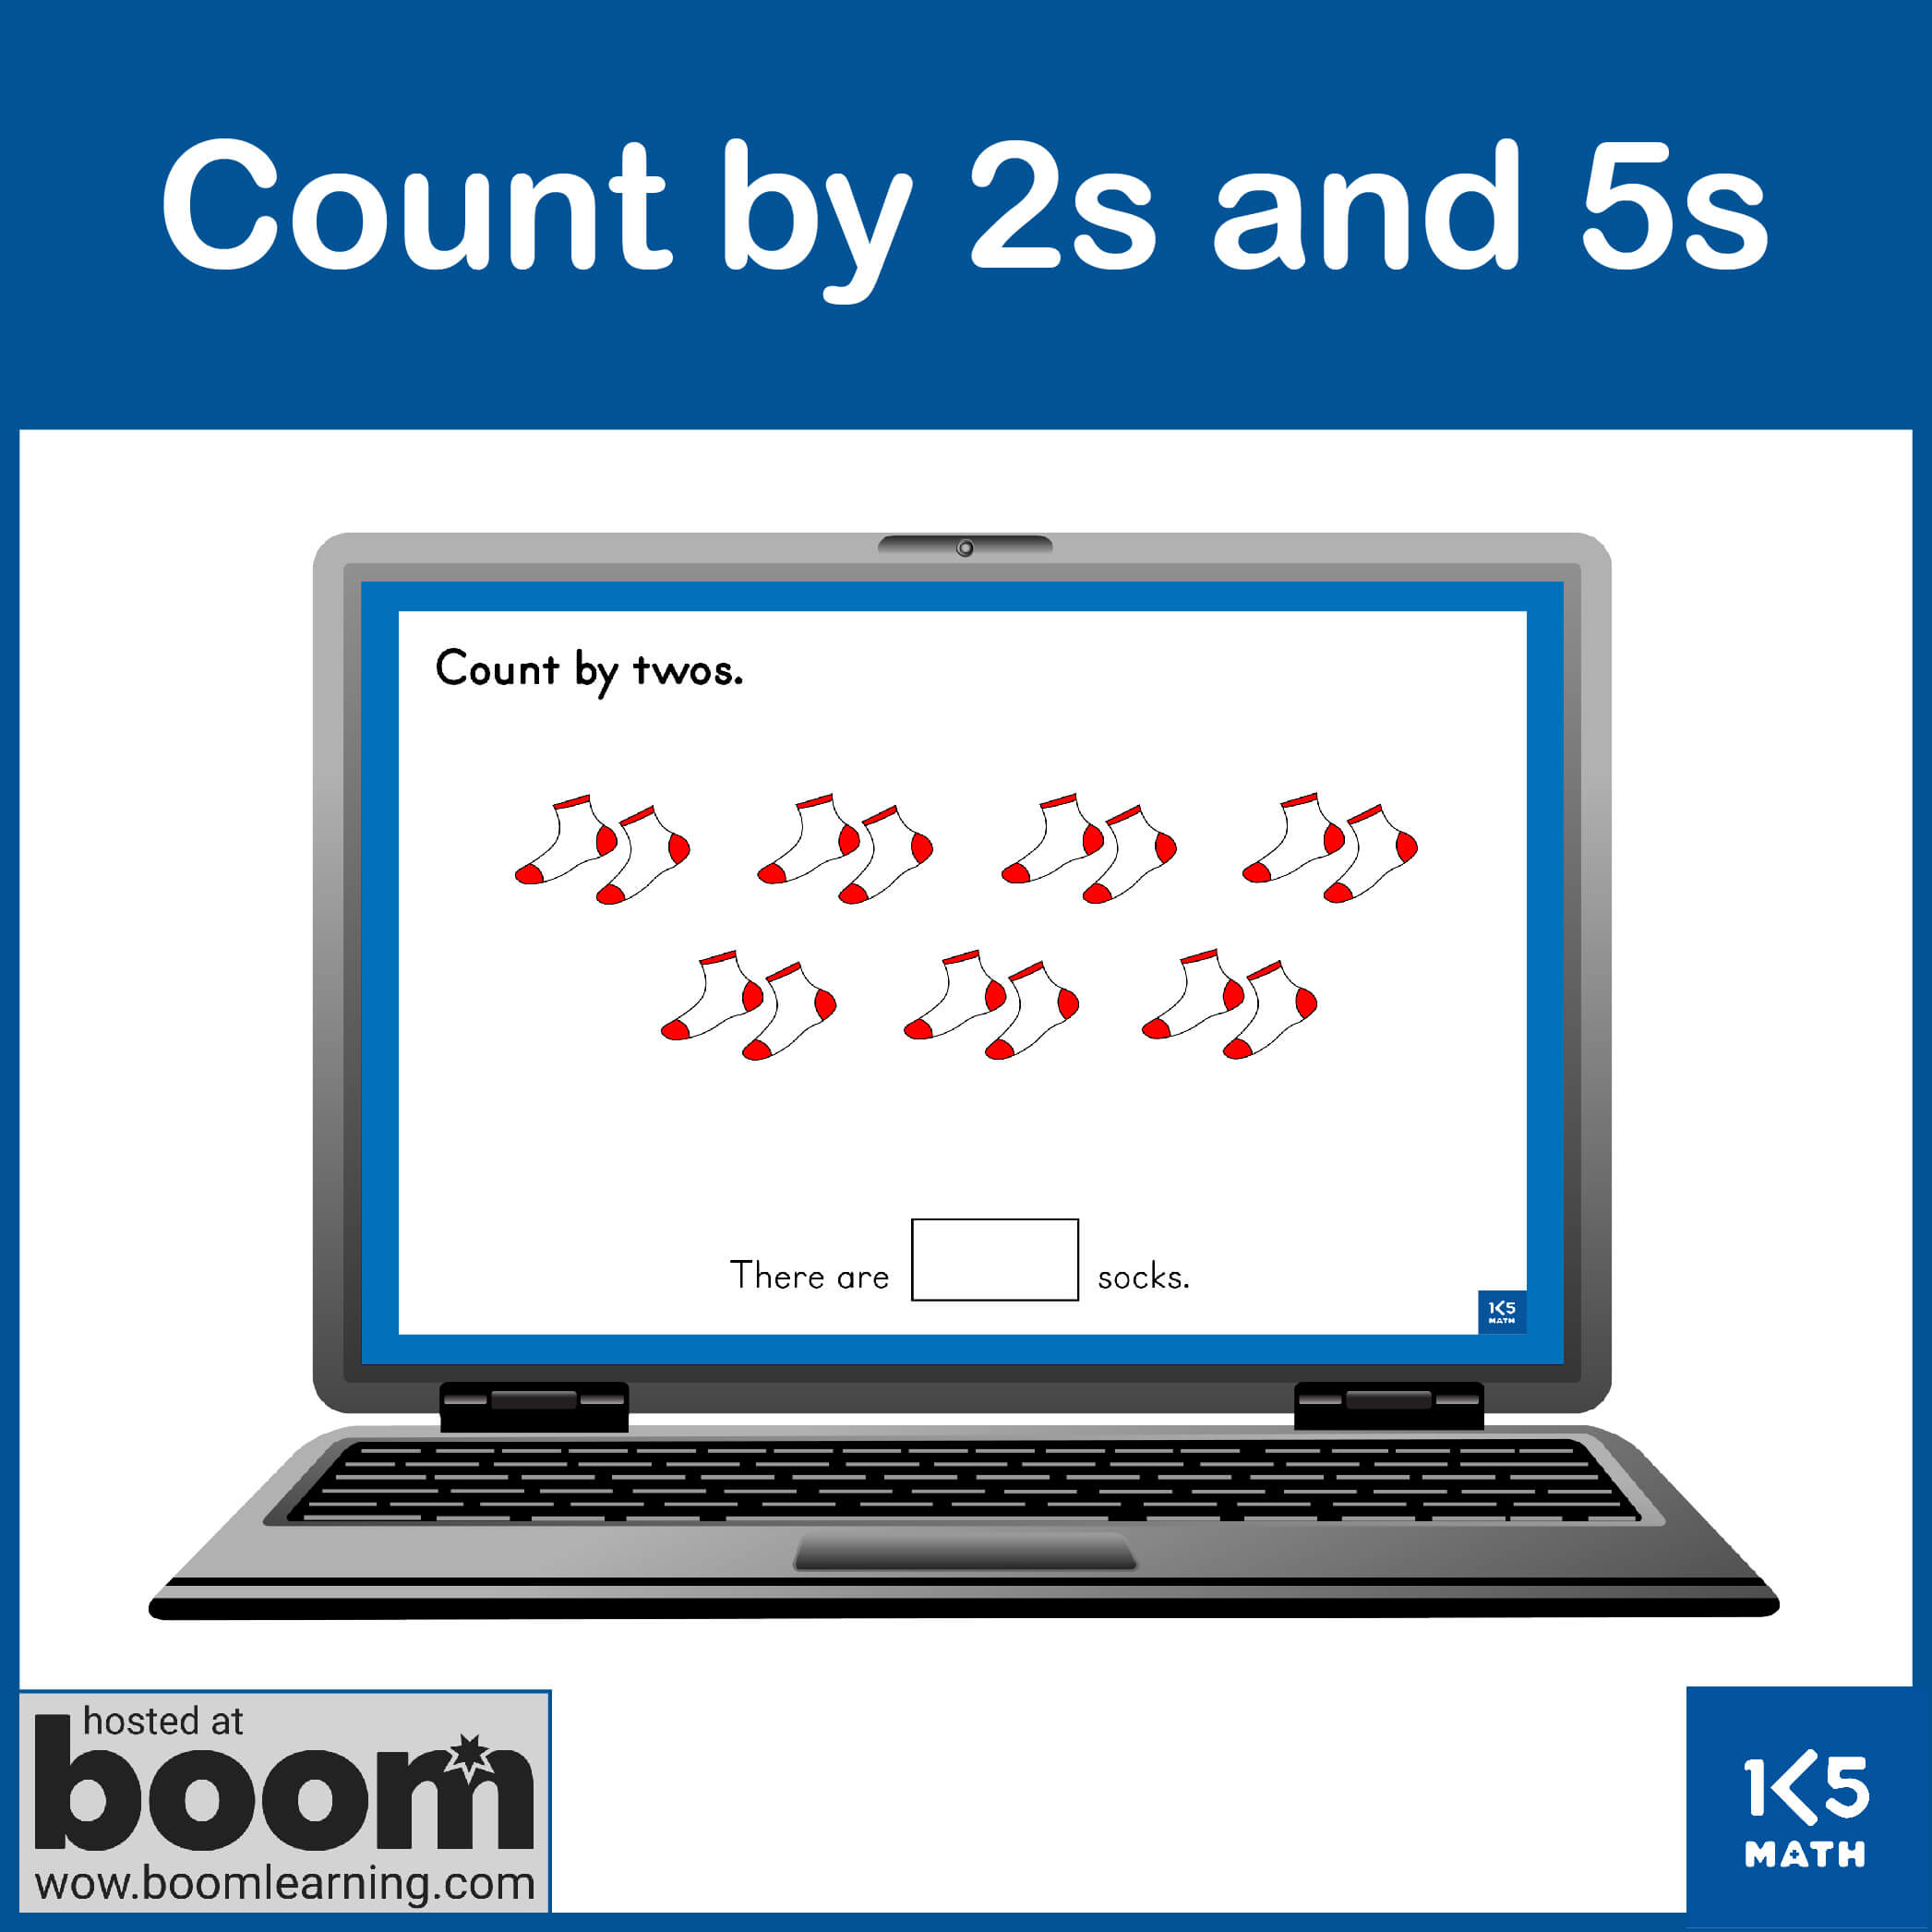 Boom Cards: Count by 2s and 5s